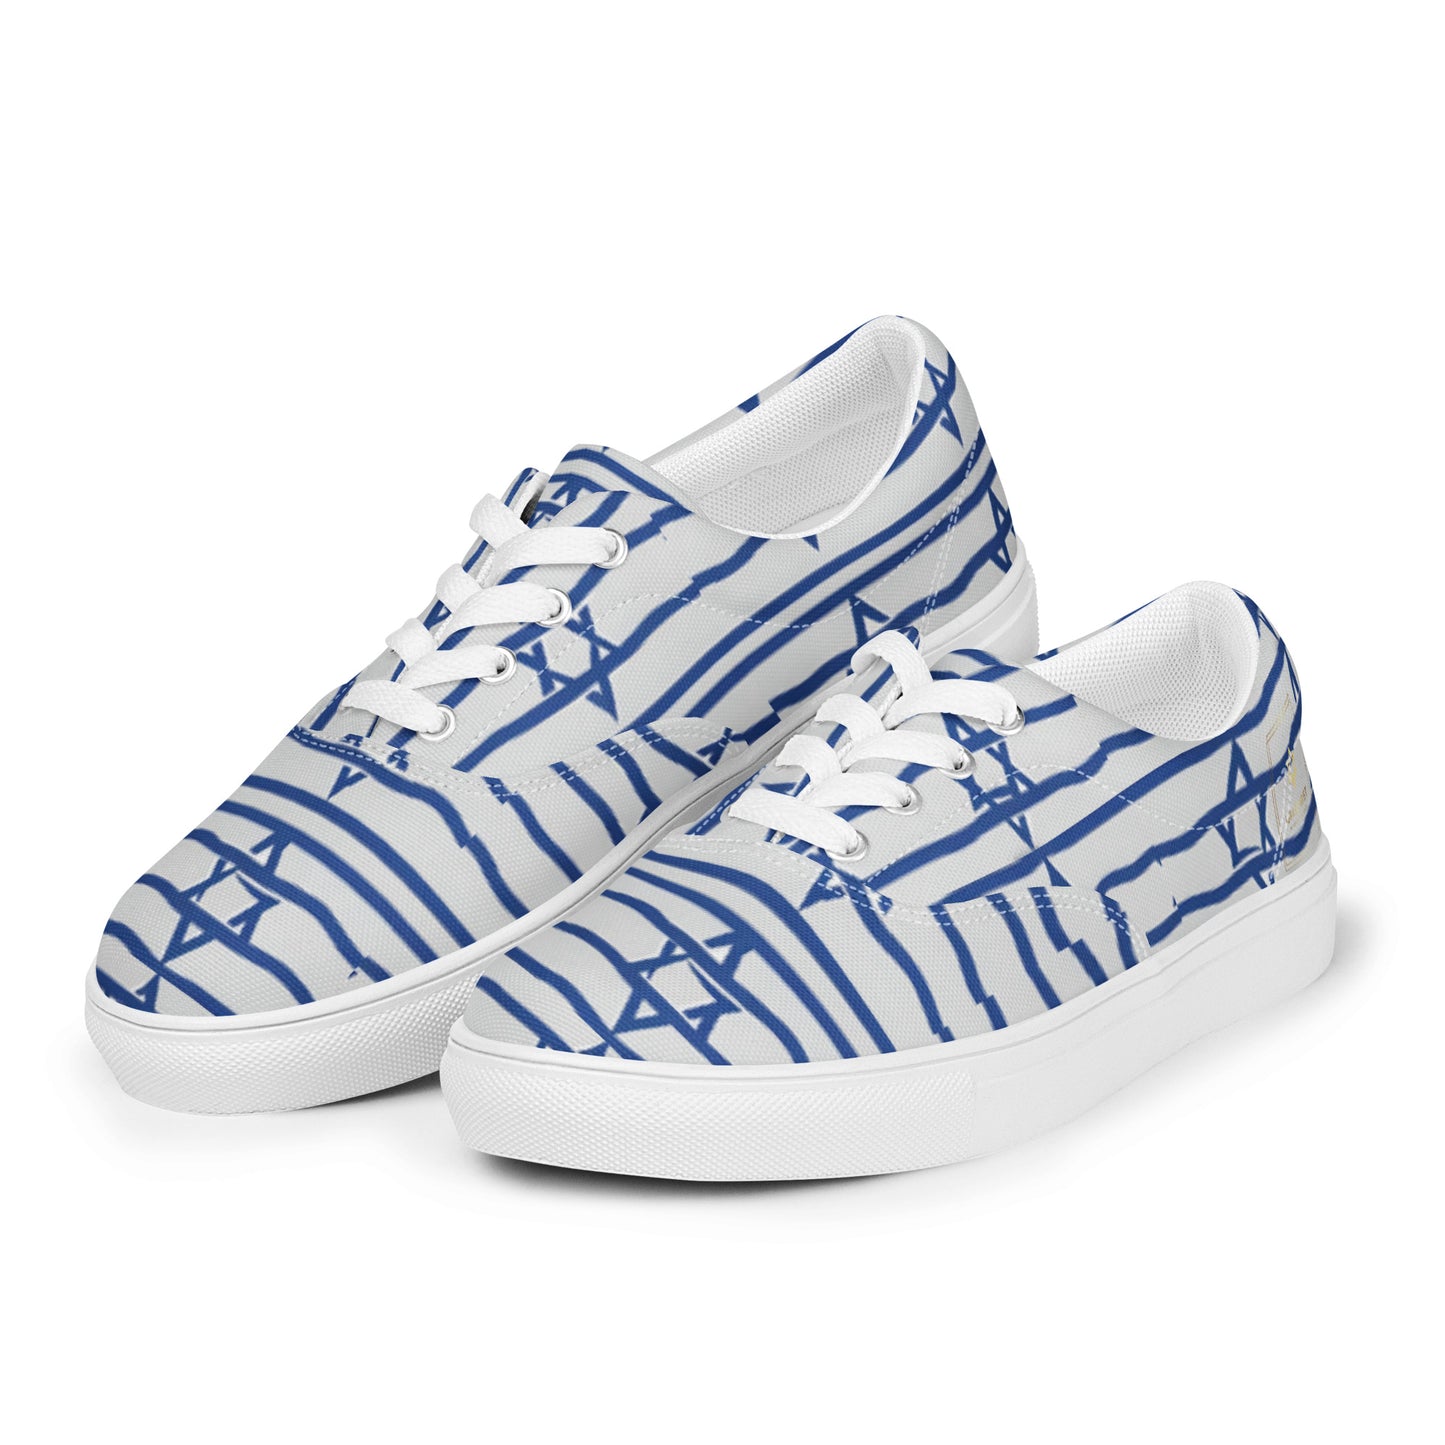 Sneakers in Israeli colors in canvas with laces